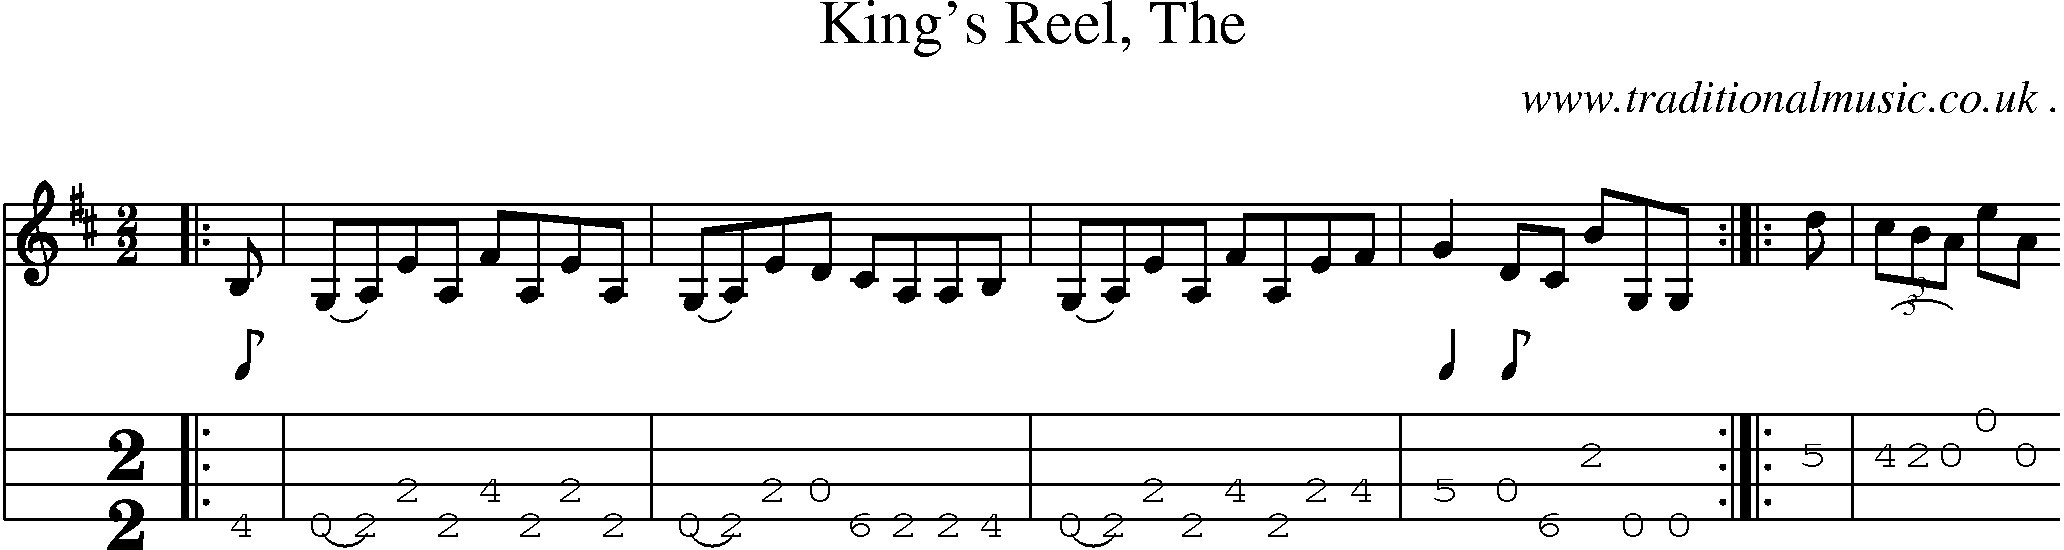 Sheet-music  score, Chords and Mandolin Tabs for Kings Reel The